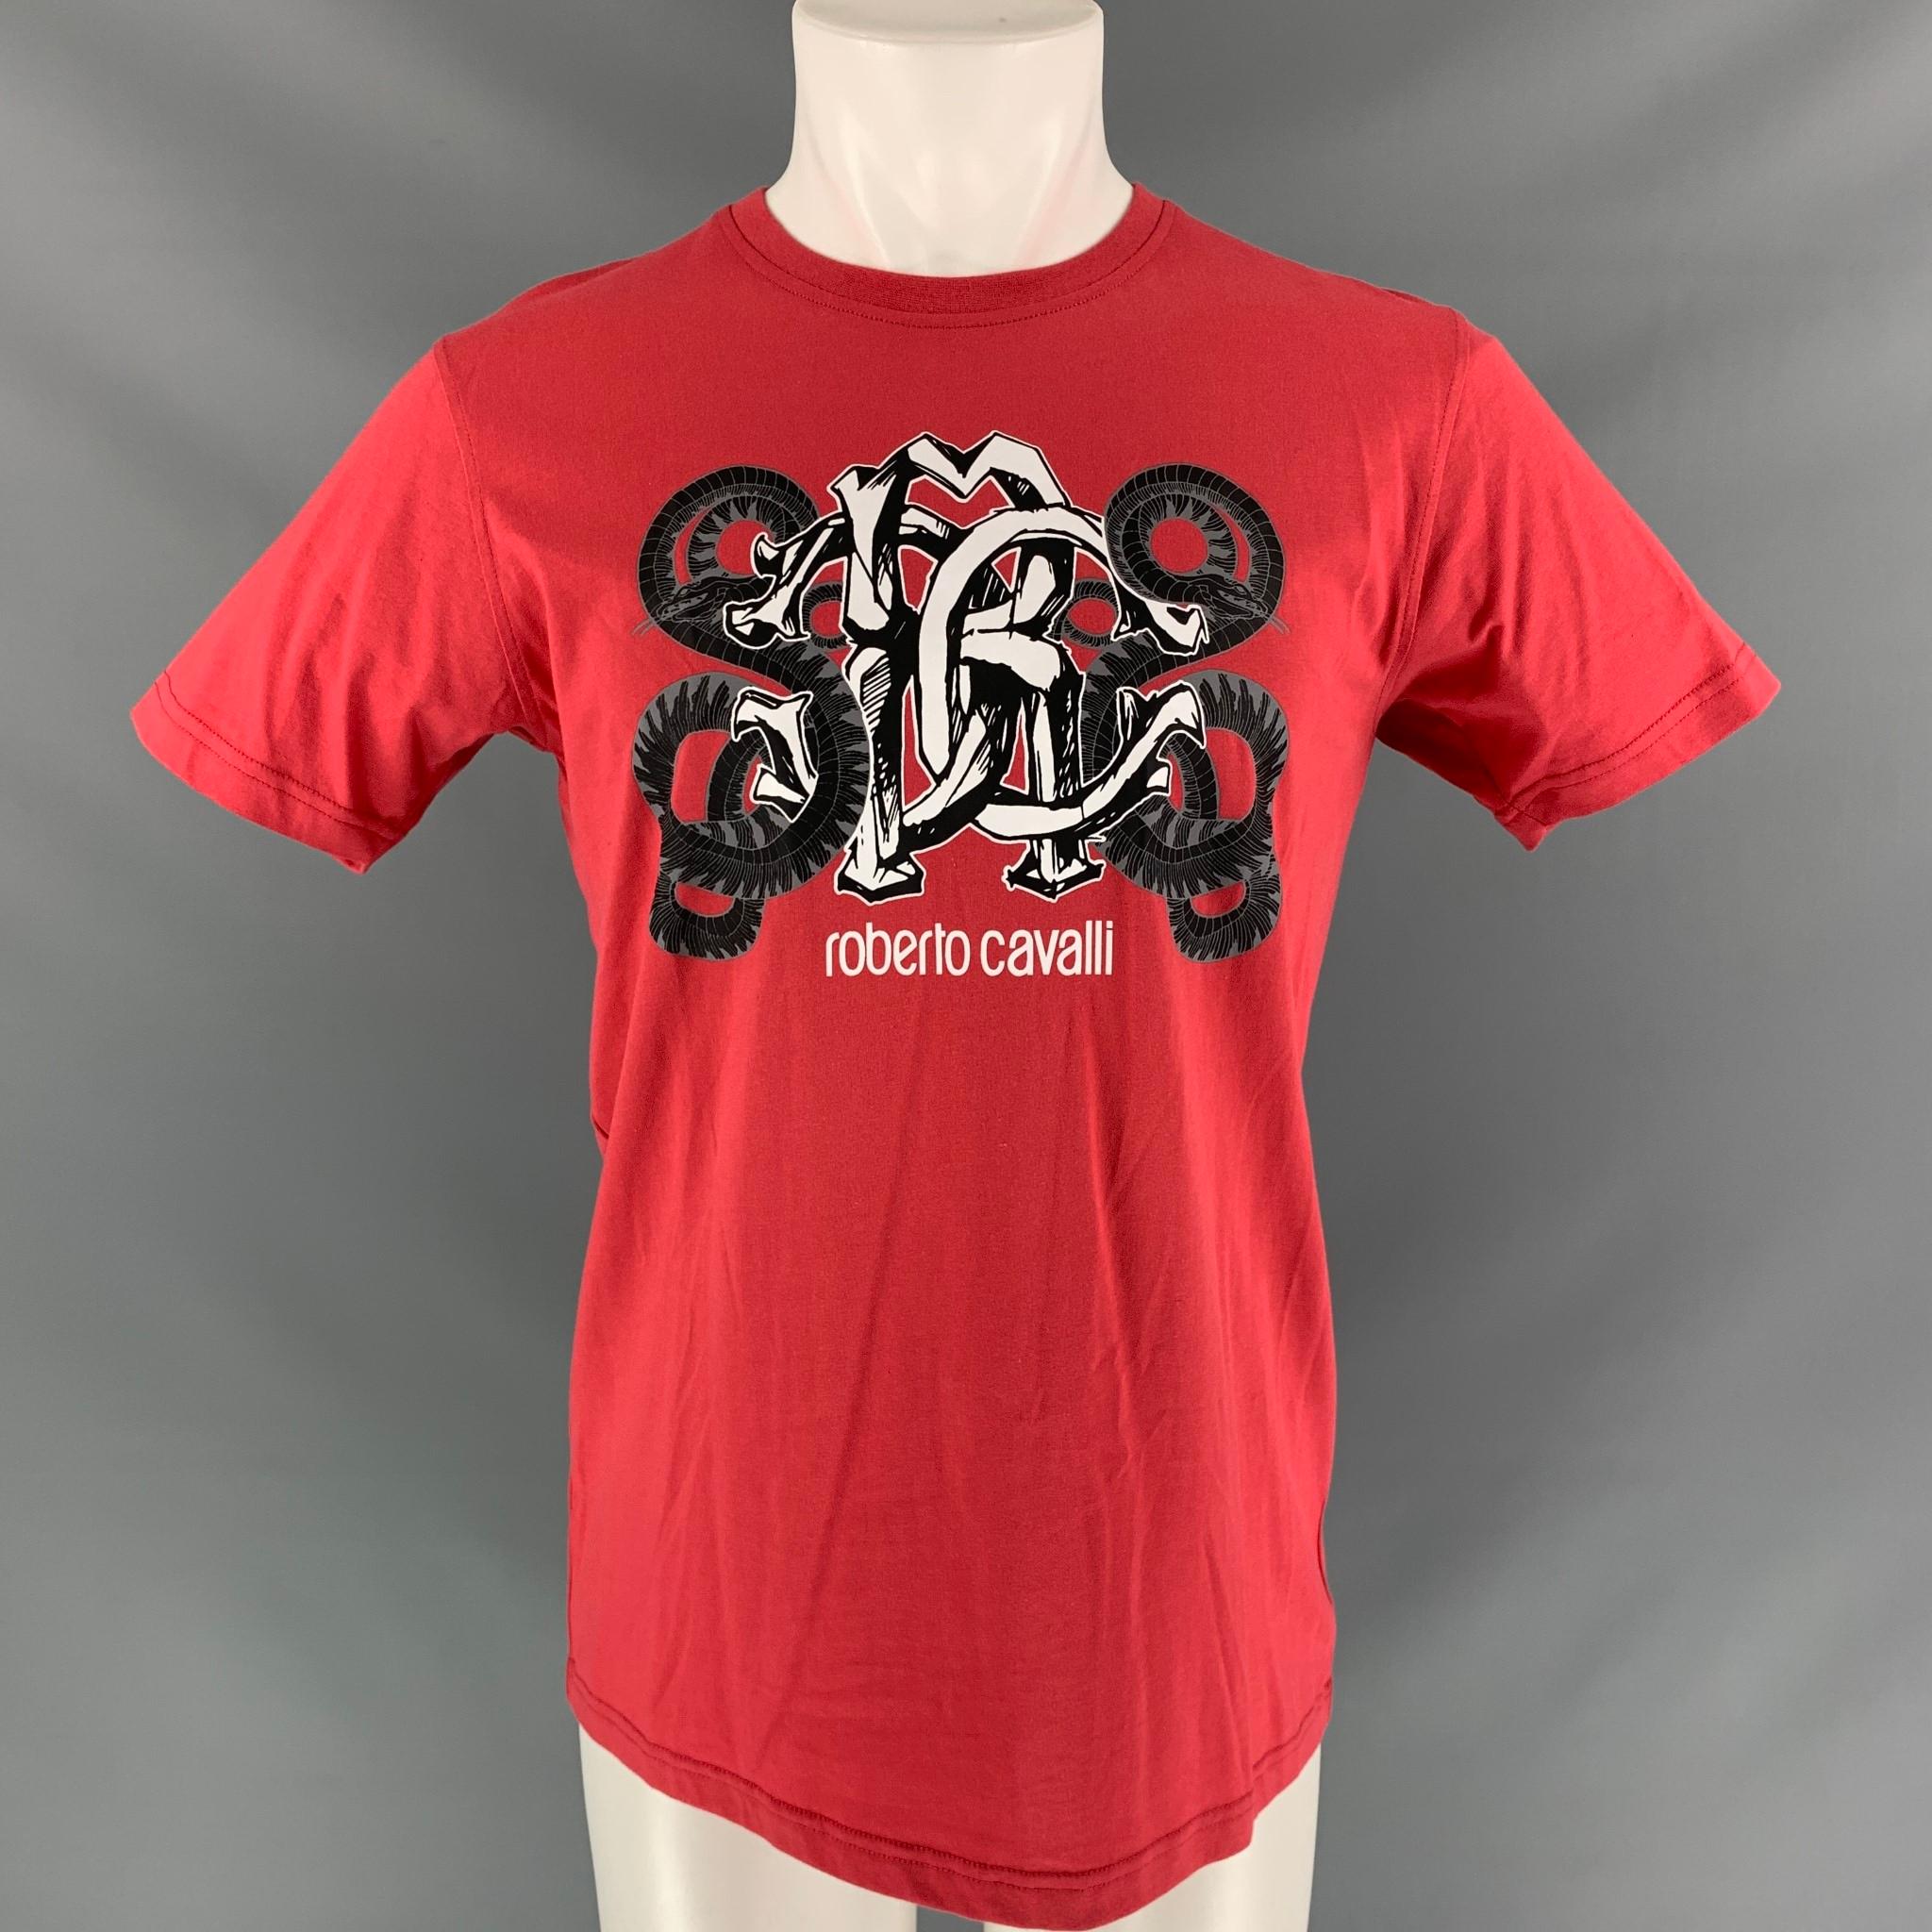 ROBERTO CAVALLI short sleeve t-shirt comes in coral red cotton, black, white and grey snakes logo graphic art at center front and a round collar.

New with Tag.
Marked: M

Measurements:

Shoulder: 18 in
Chest: 43 in
Sleeve: 8 in
Length: 28 in